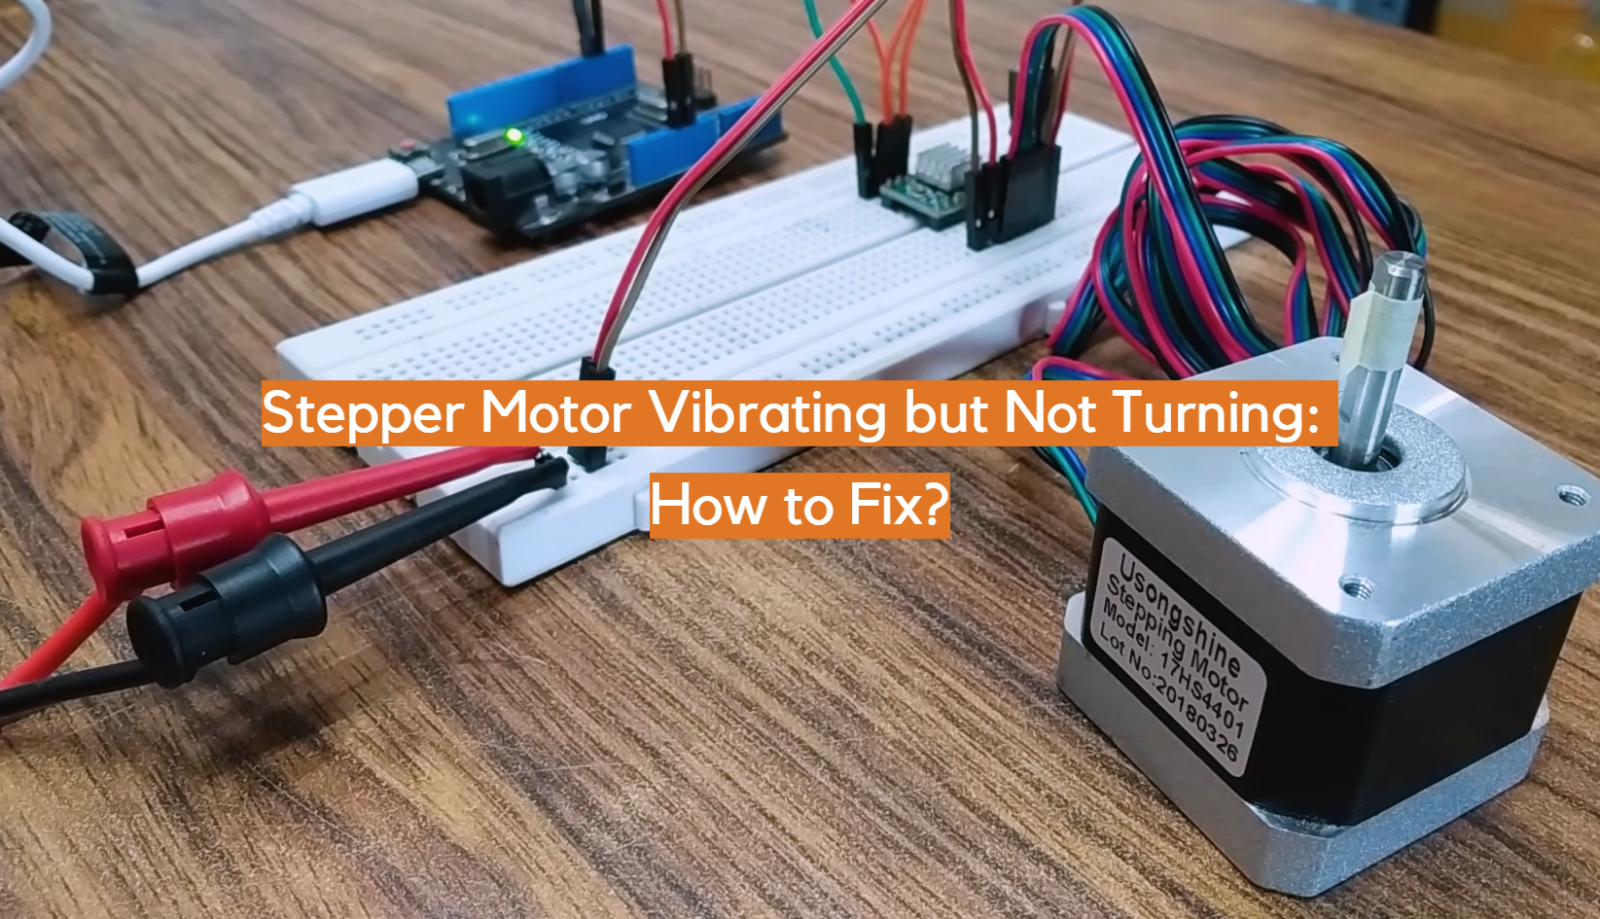 Stepper Motor Vibrating but Not Turning: How to Fix?